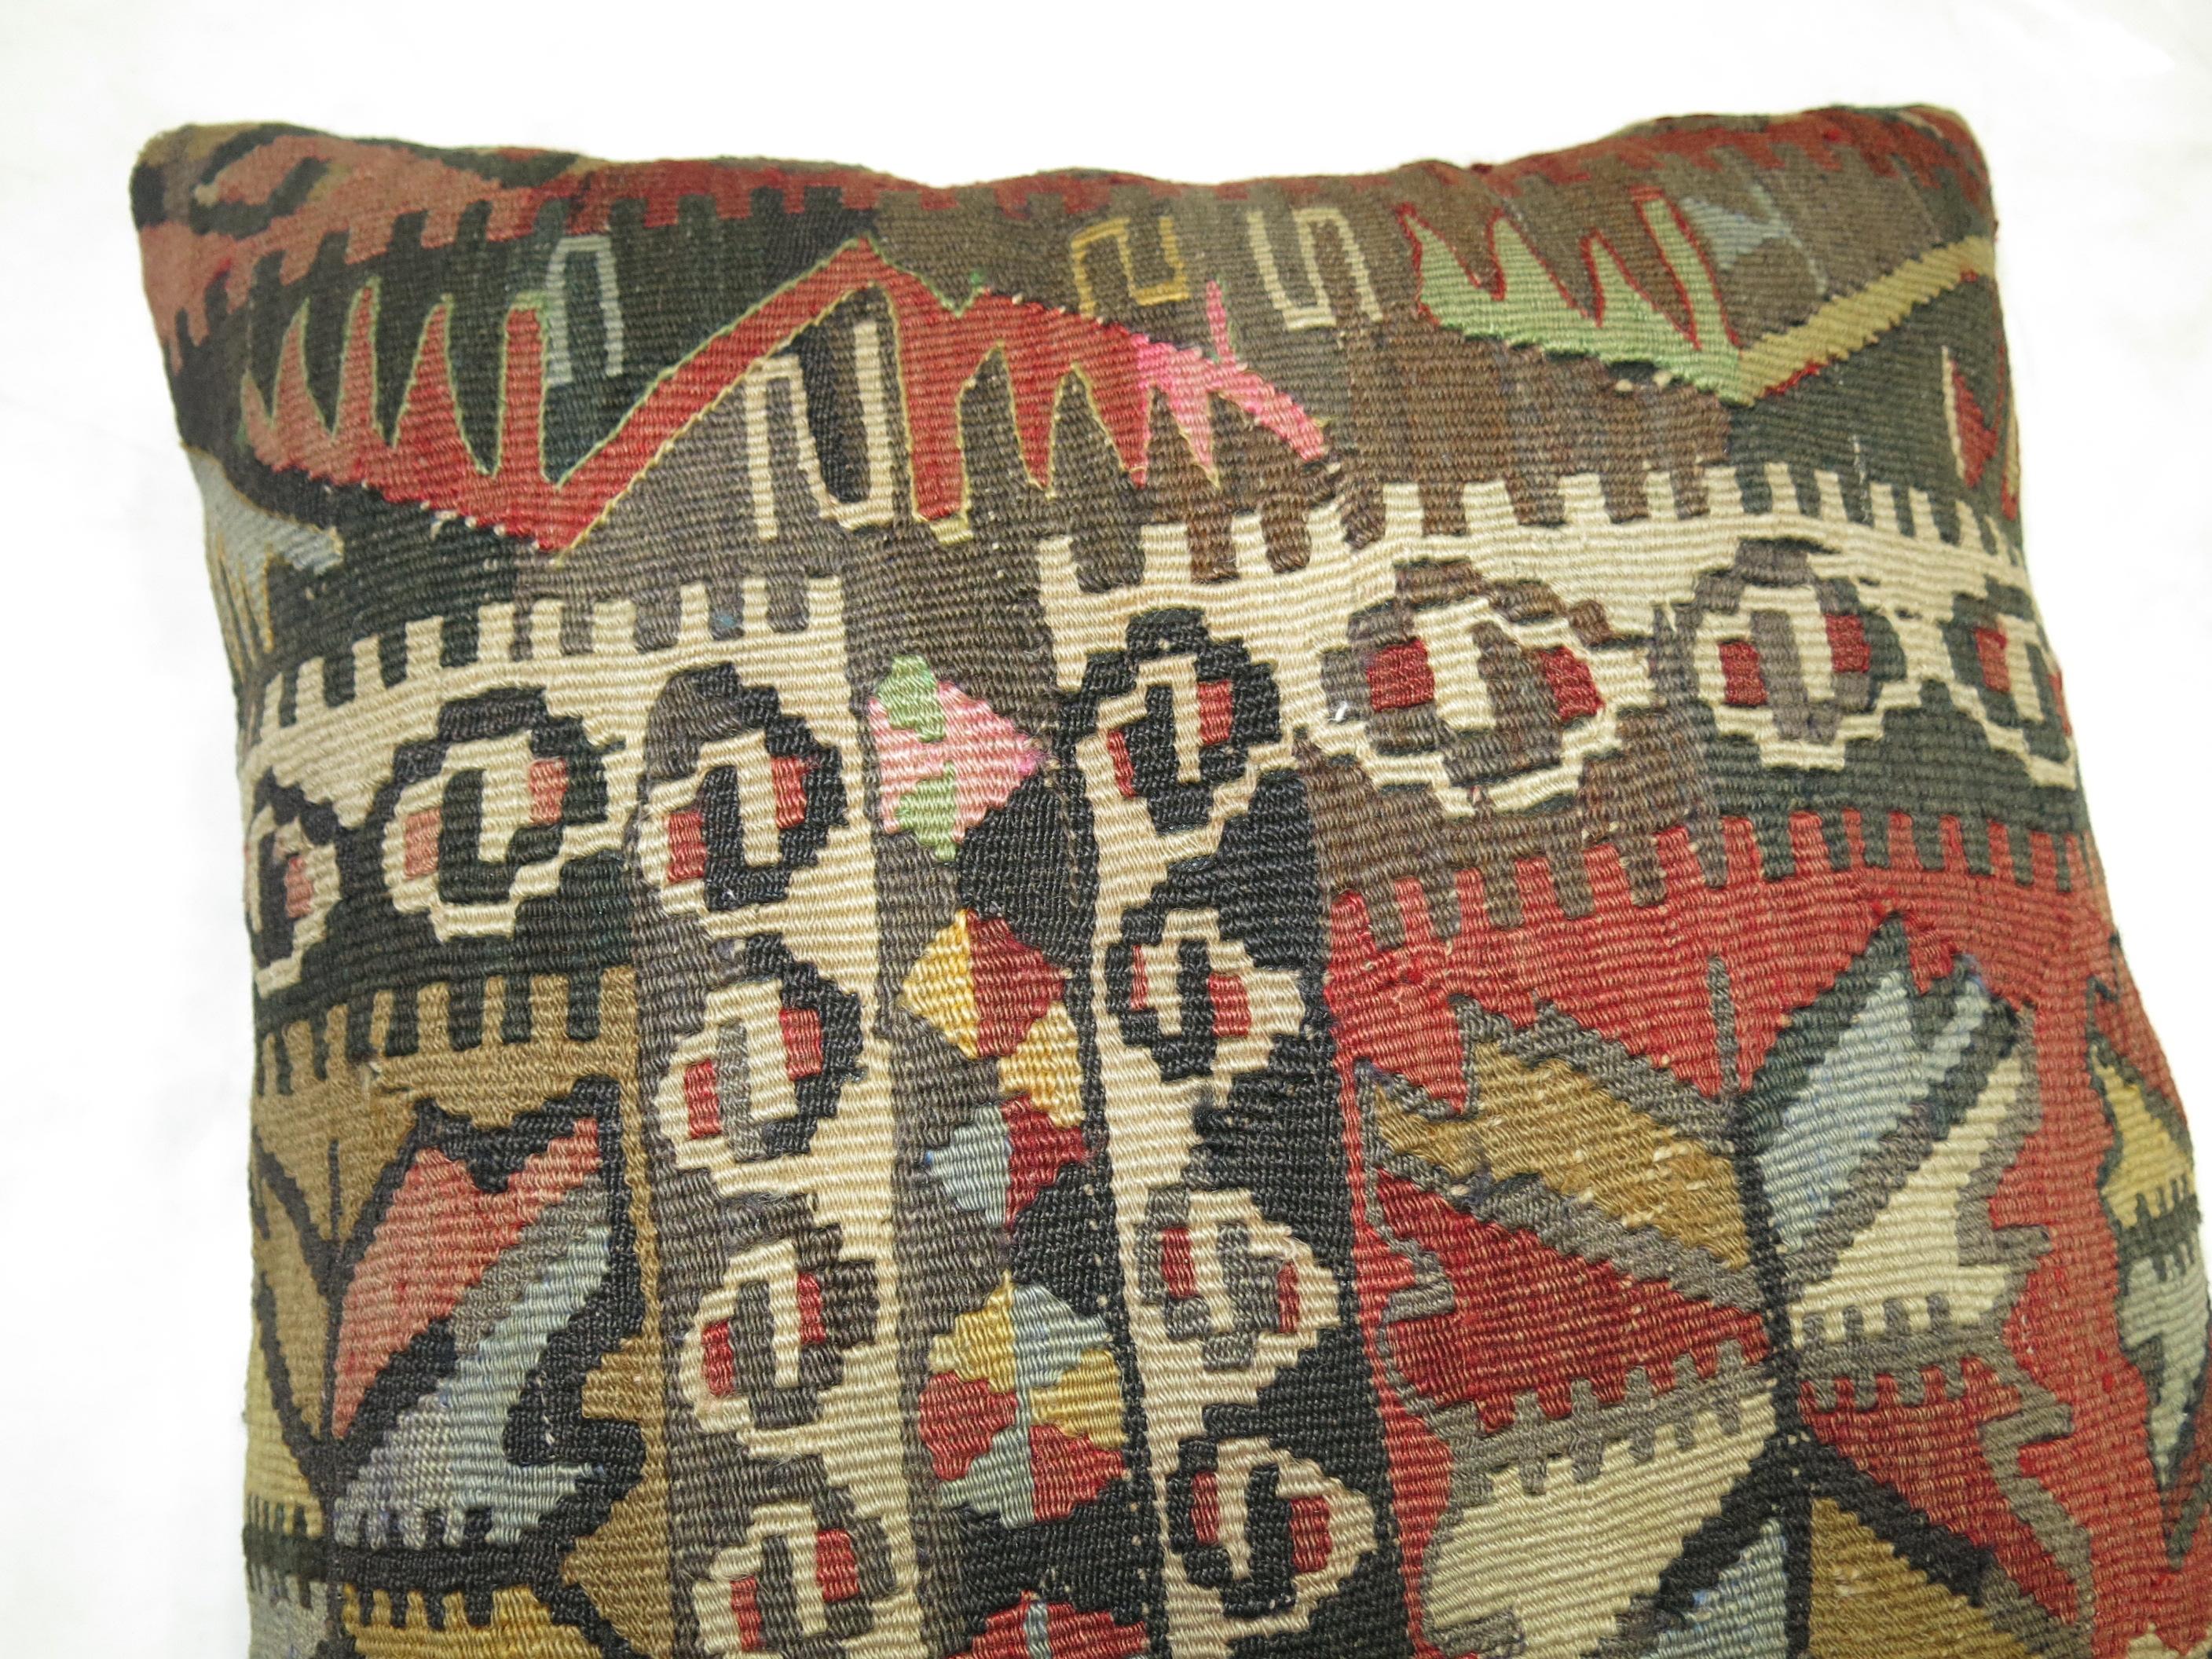 Pillow made from a vintage Turkish Kilim flat-weave.